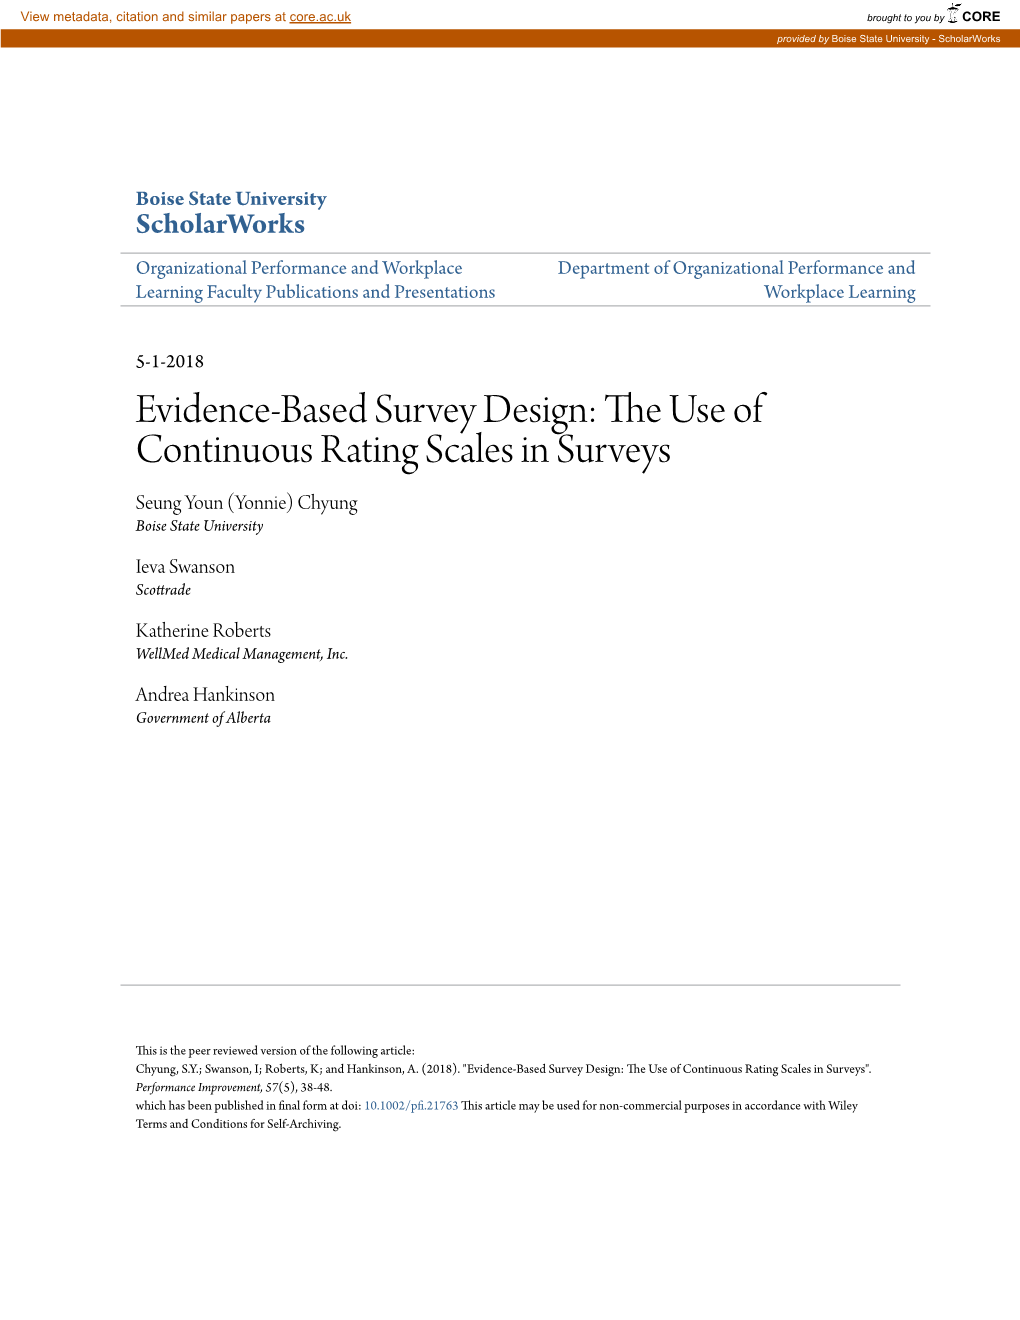 Evidence‐Based Survey Design: the Use of Continuous Rating Scales In